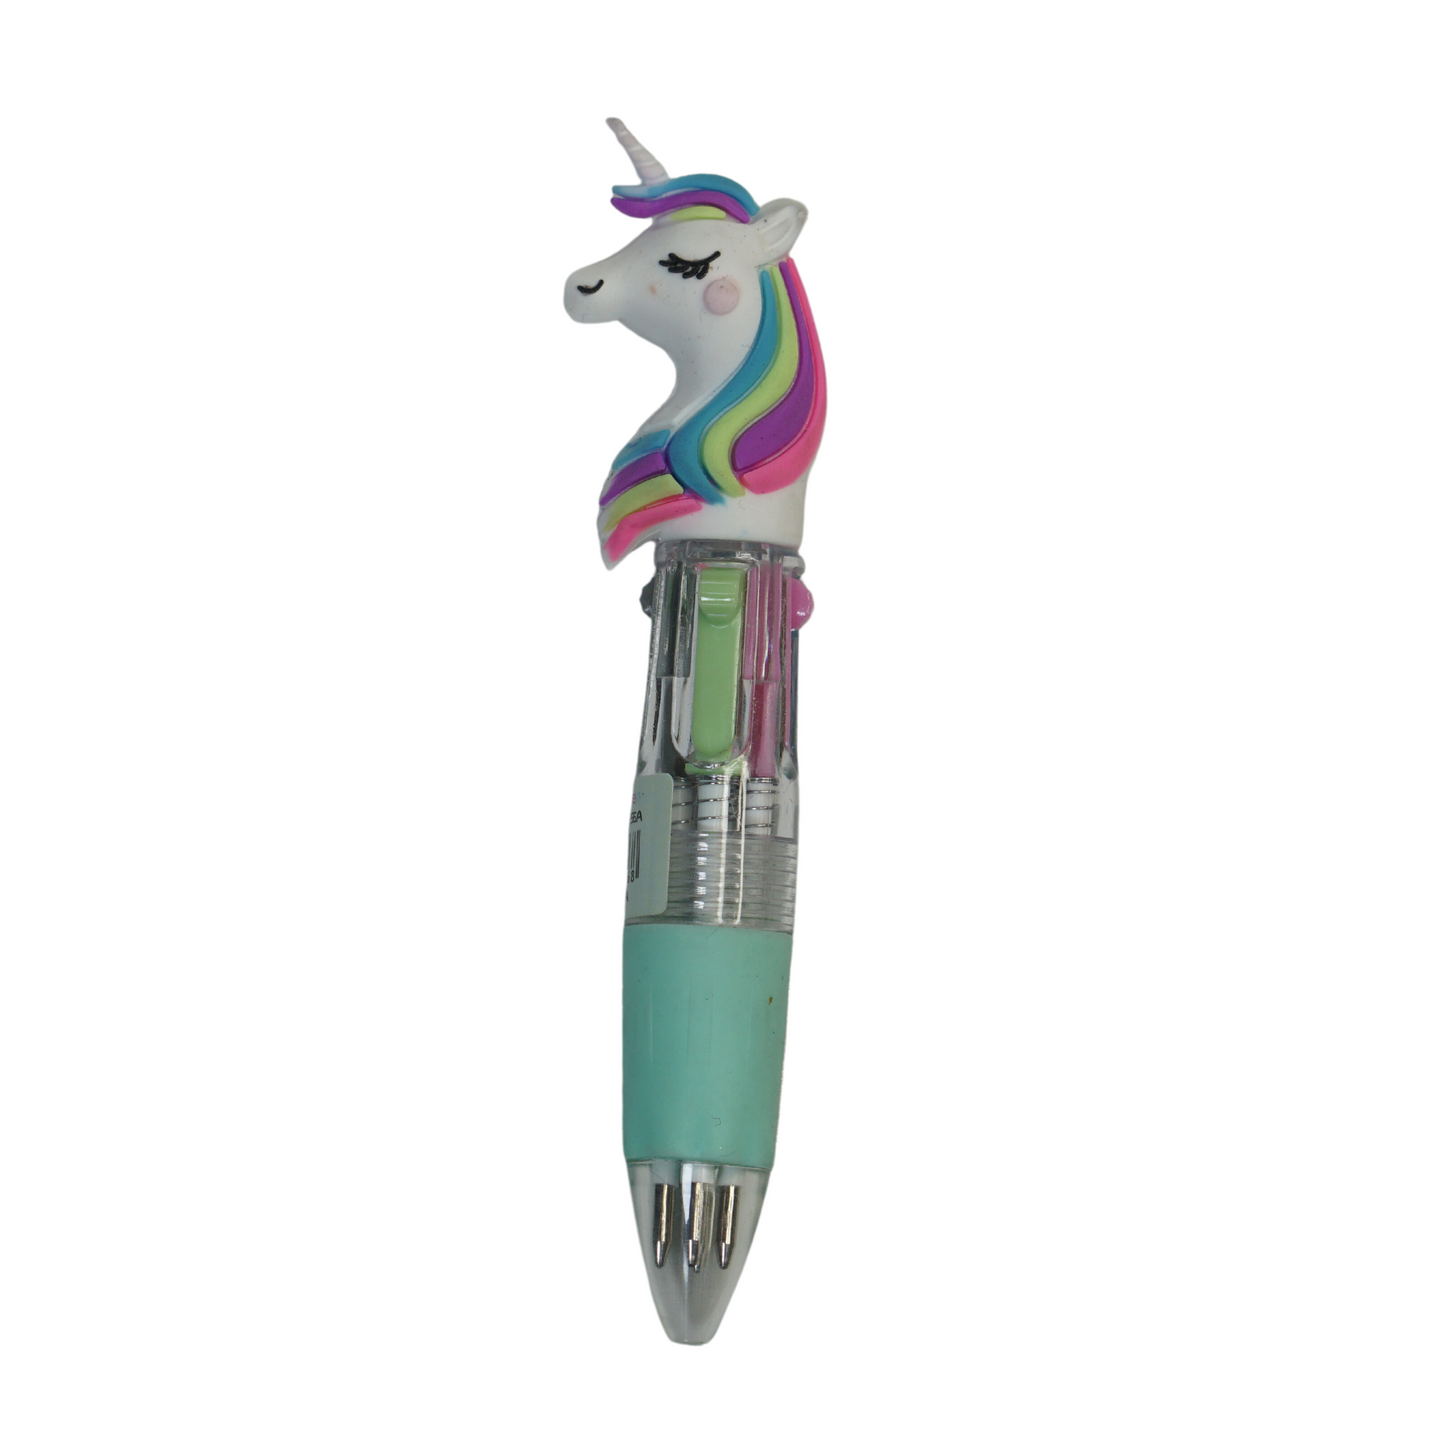 4 SHADE Unicorn Coloring Pen for Kids